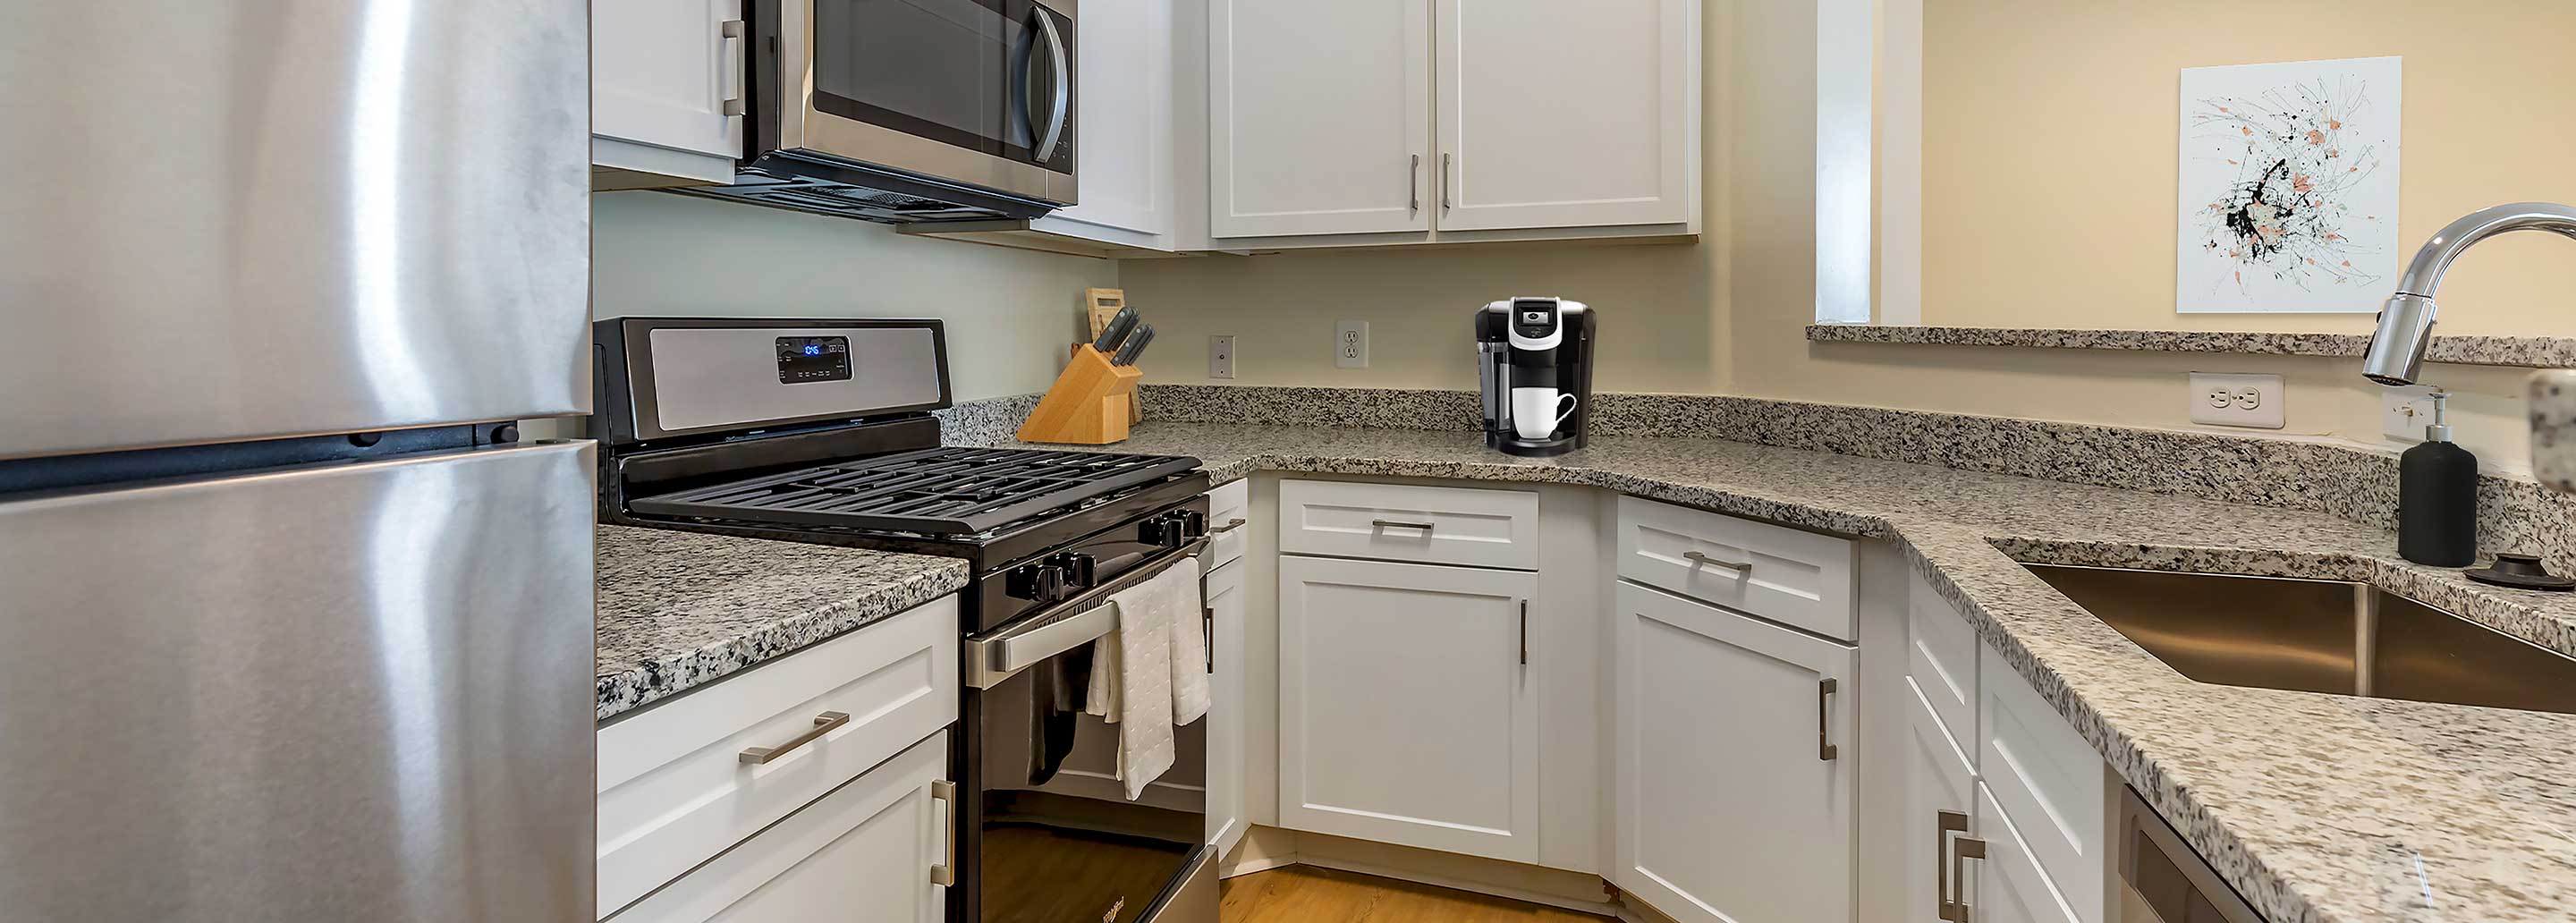 Renovated Package I kitchen with white cabinetry, grey granite countertops, stainless steel appliances, and hard surface plank flooring